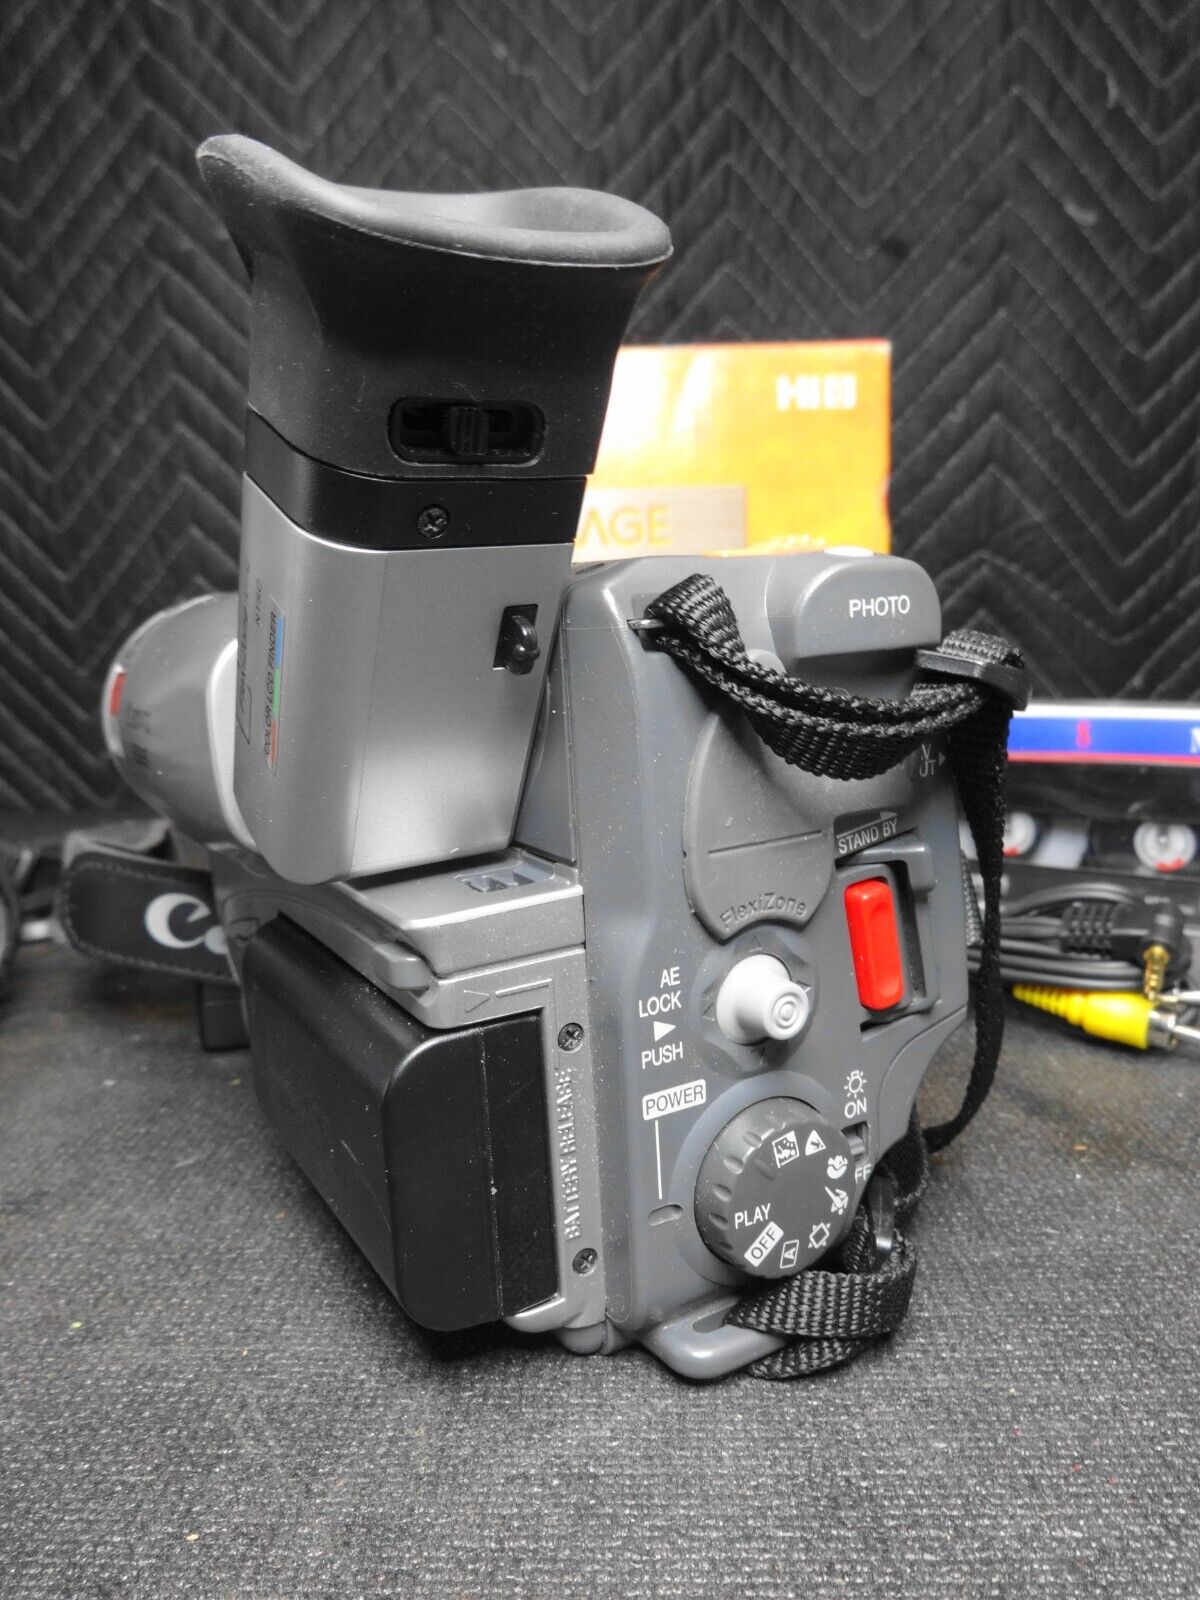 Canon ES65 HI-8 Camcorder - Great for Transfer! Watch Record Transfer Hi8